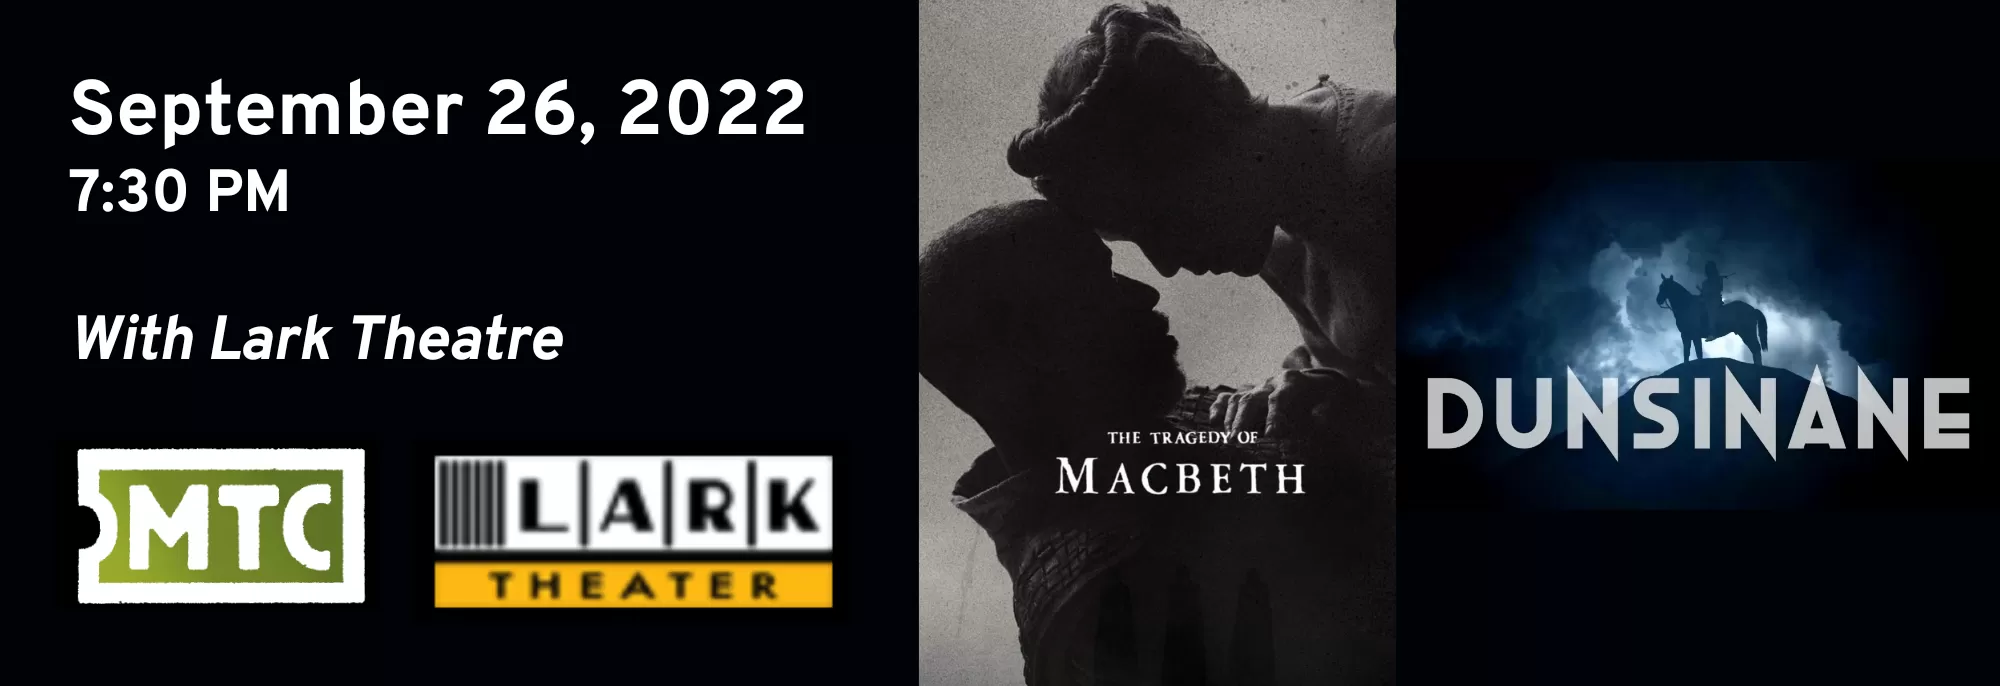 THE TRAGEDY OF MACBETH AT THE LARK THEATER FROM MTC